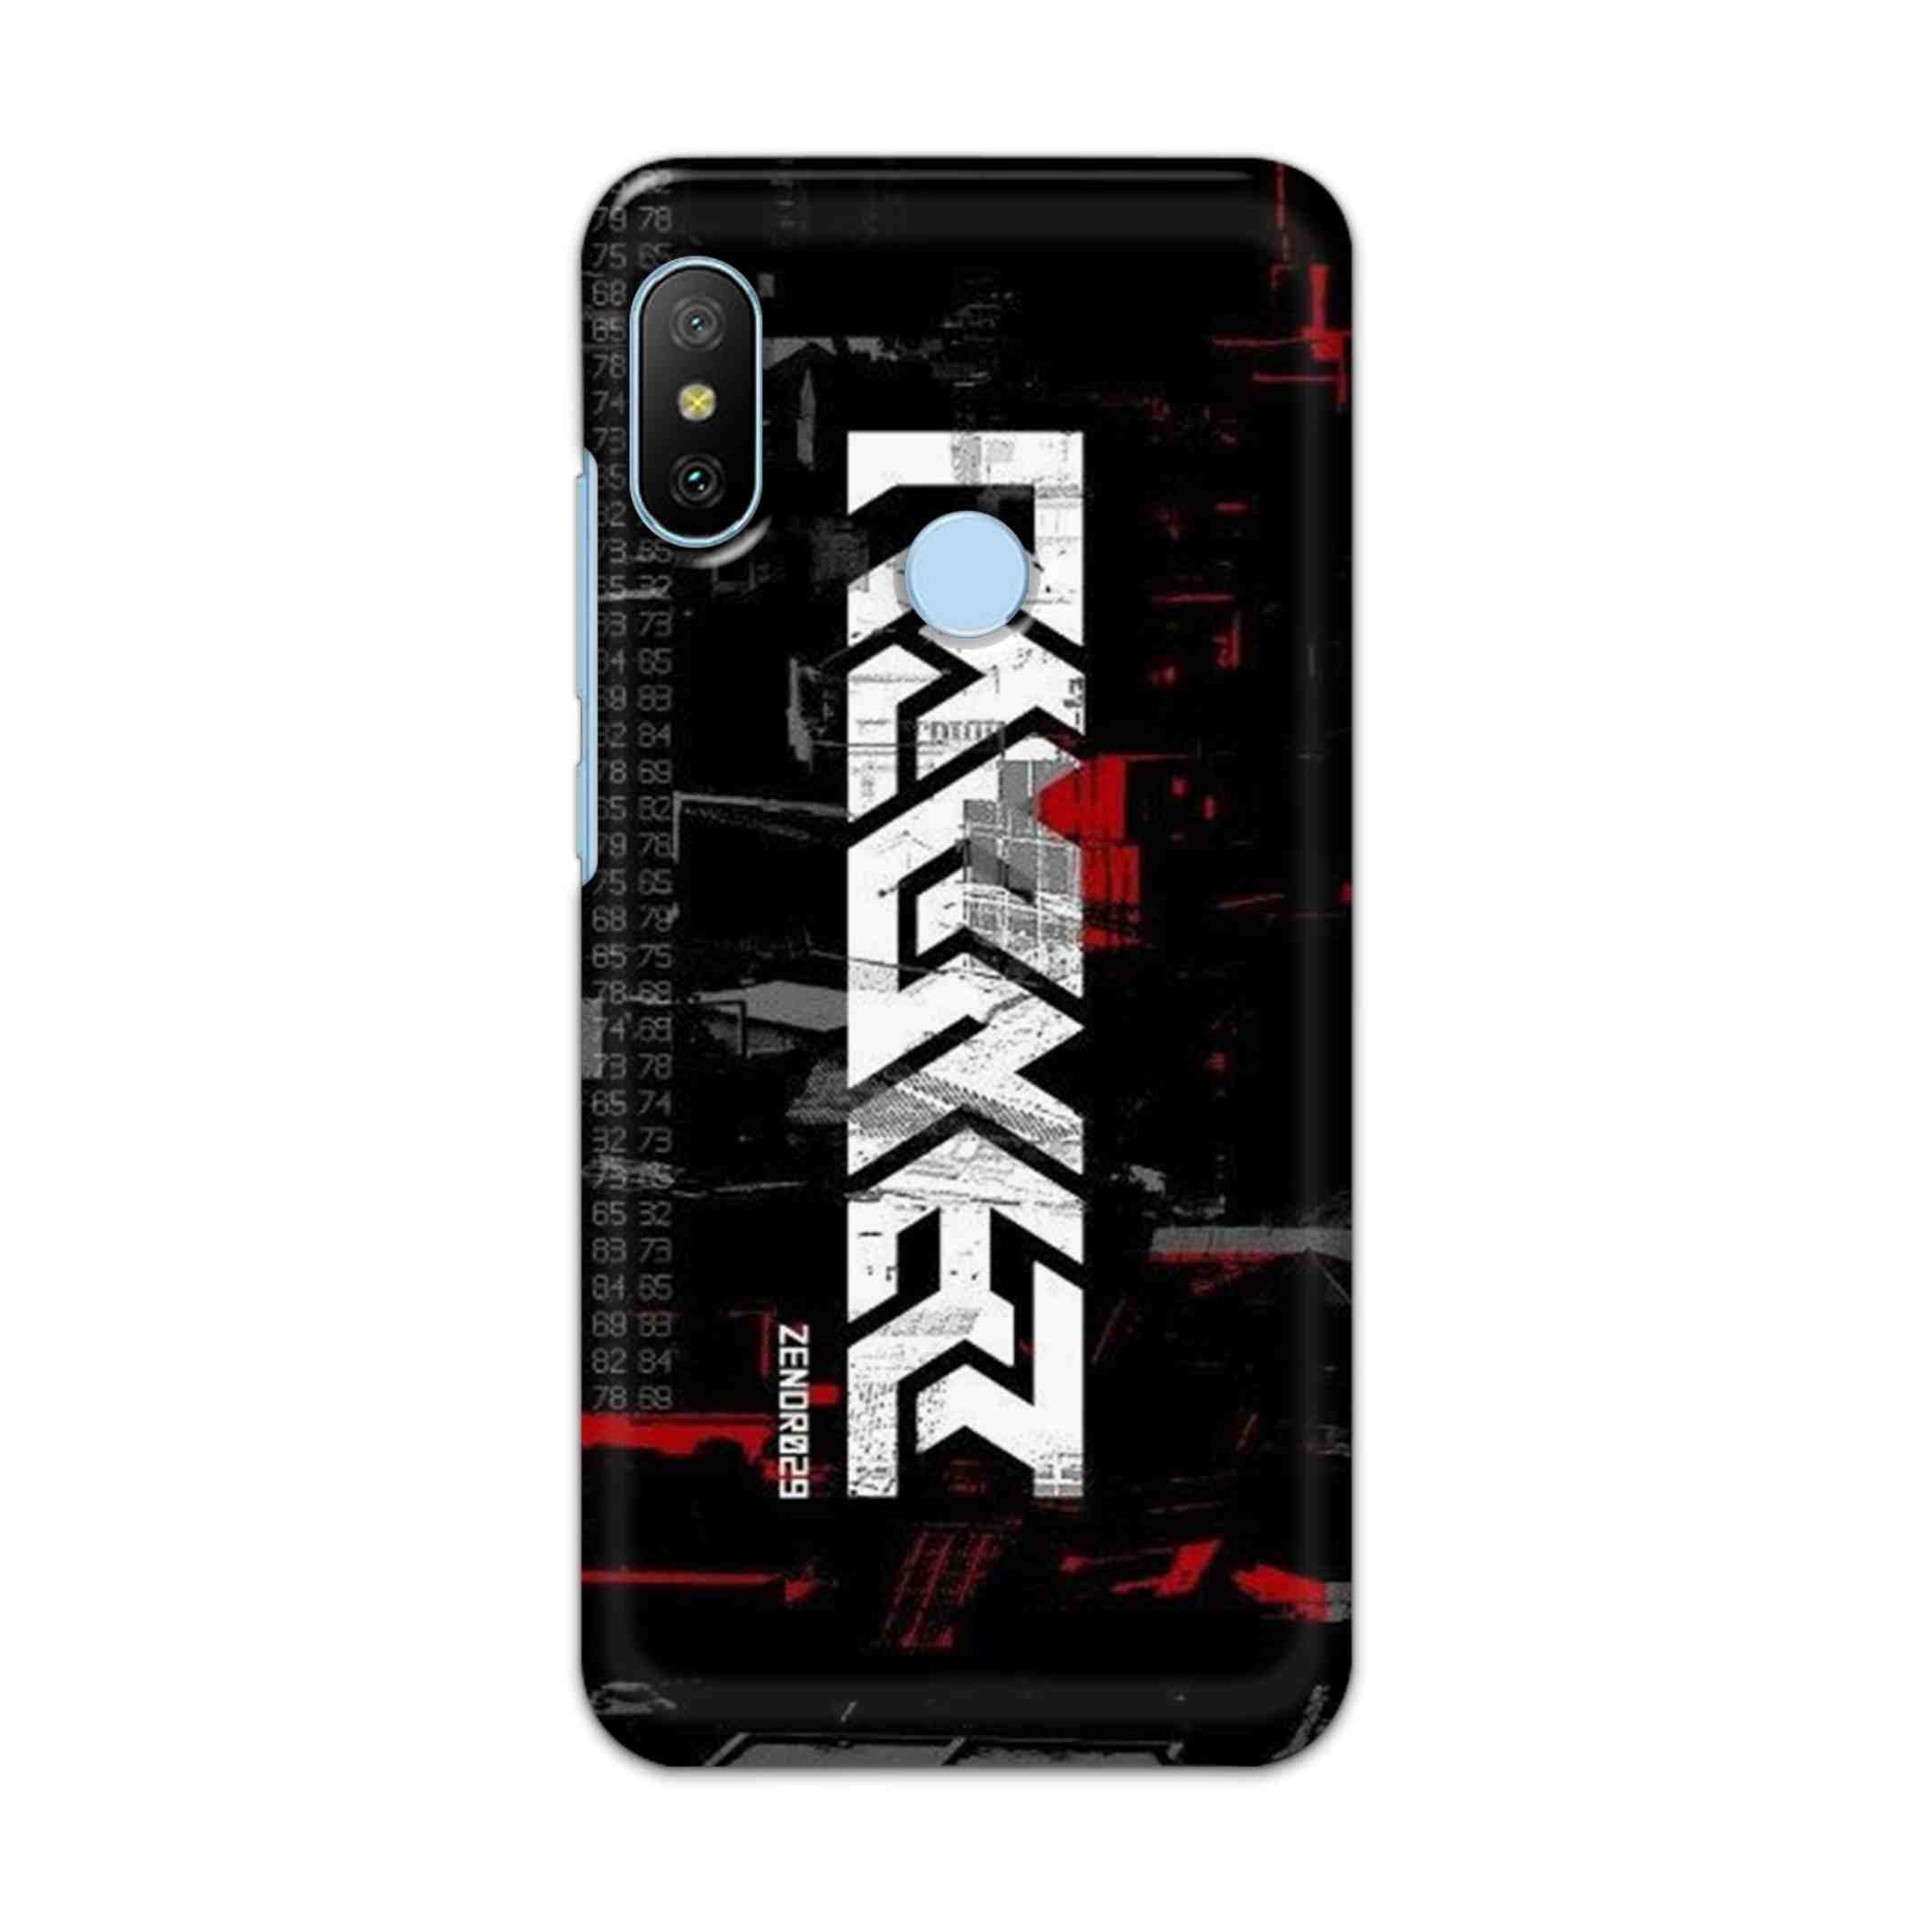 Buy Raxer Hard Back Mobile Phone Case/Cover For Xiaomi Redmi 6 Pro Online